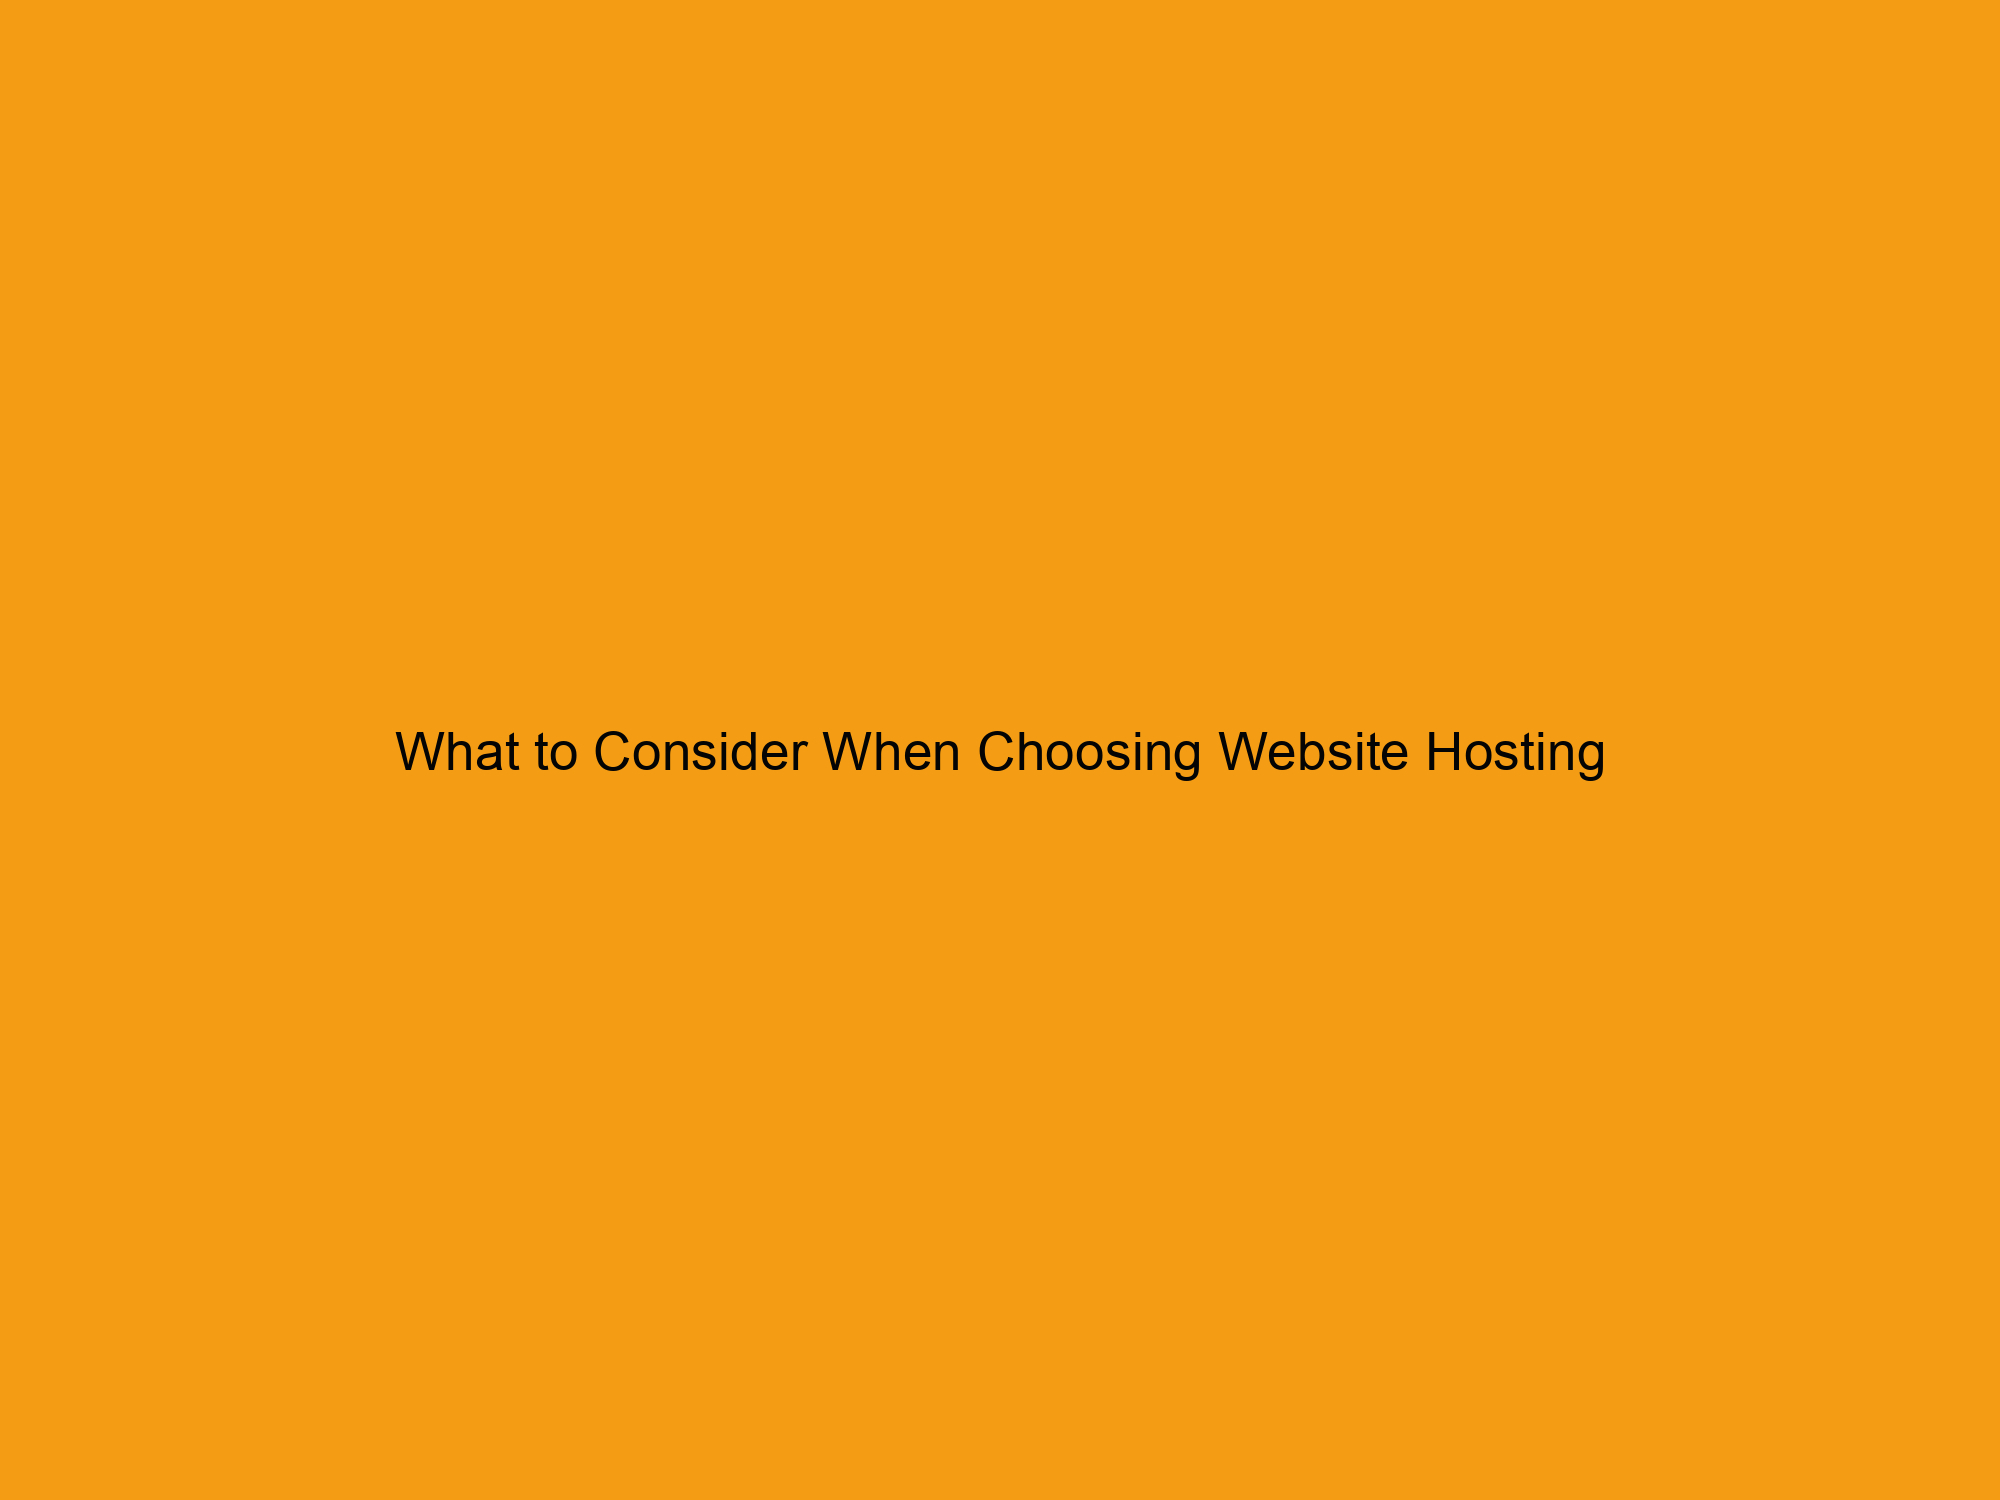 What to Consider When Choosing Website Hosting